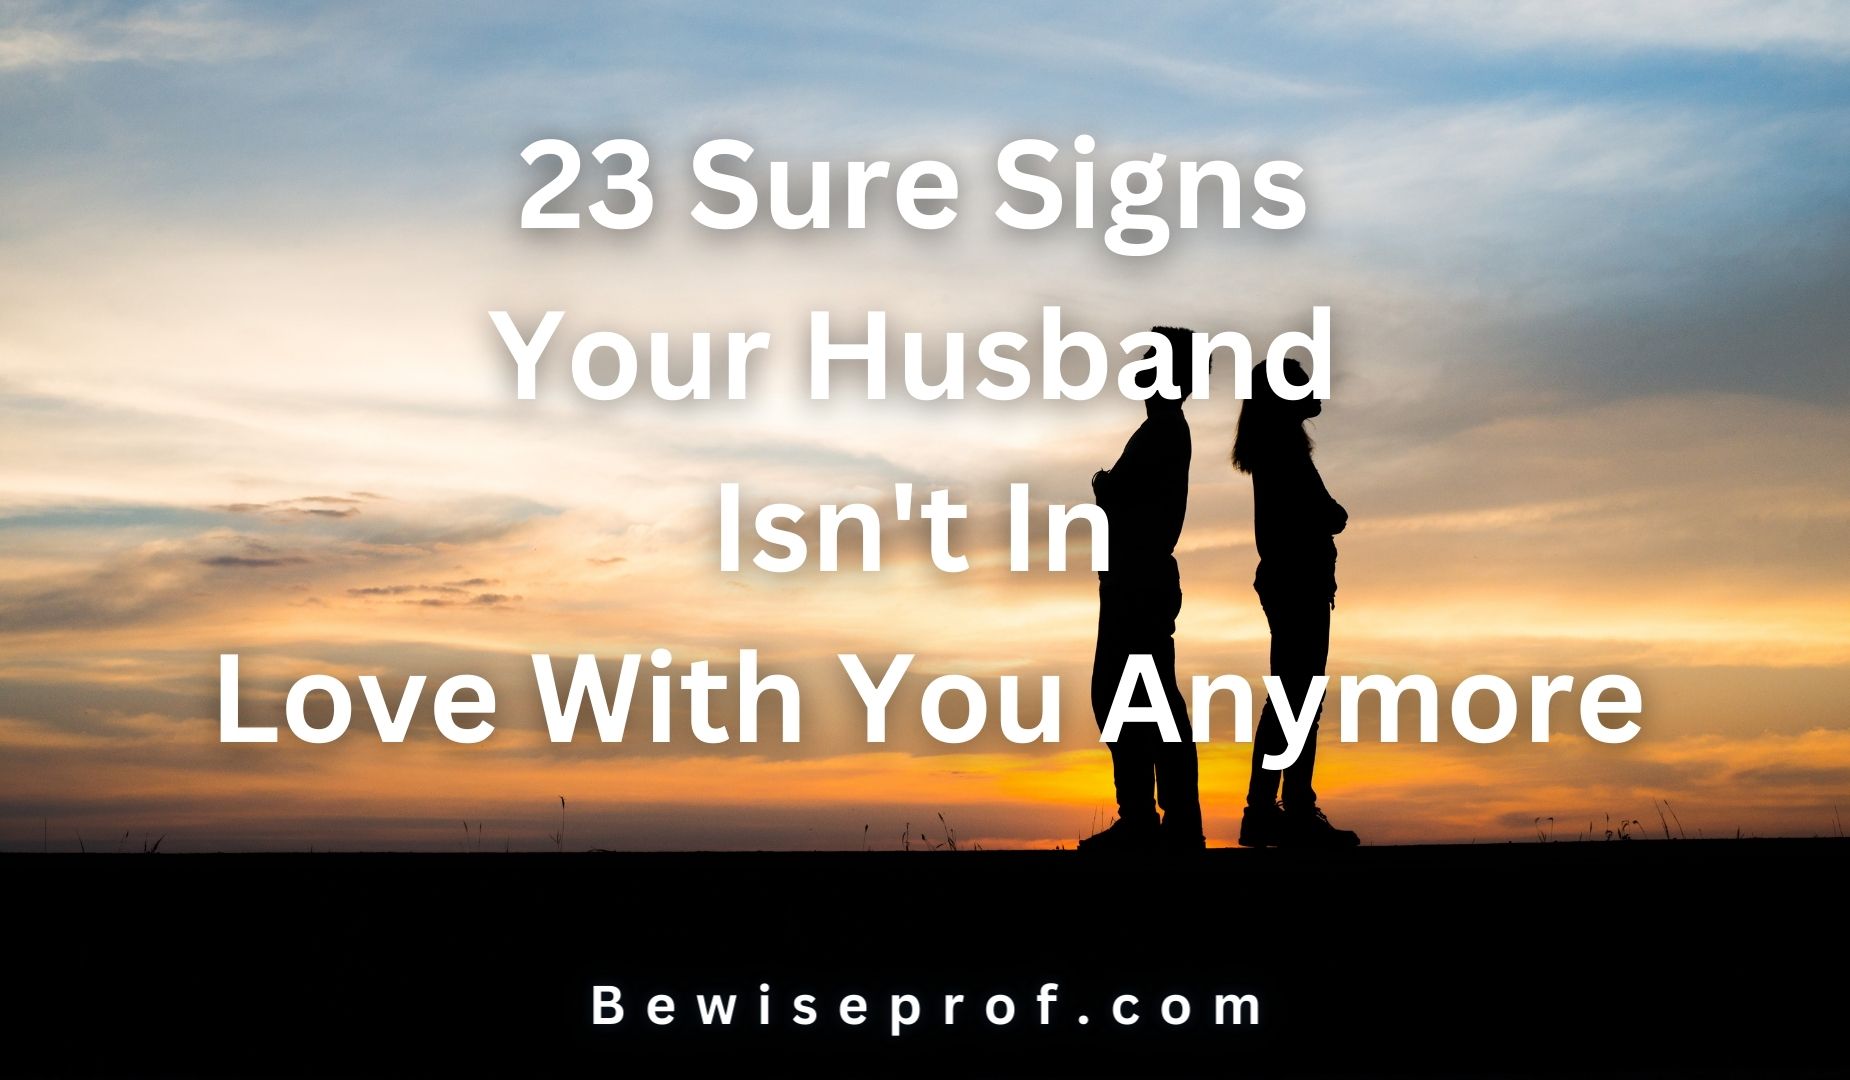 23 Sure Signs Your Husband Isn't In Love With You Anymore